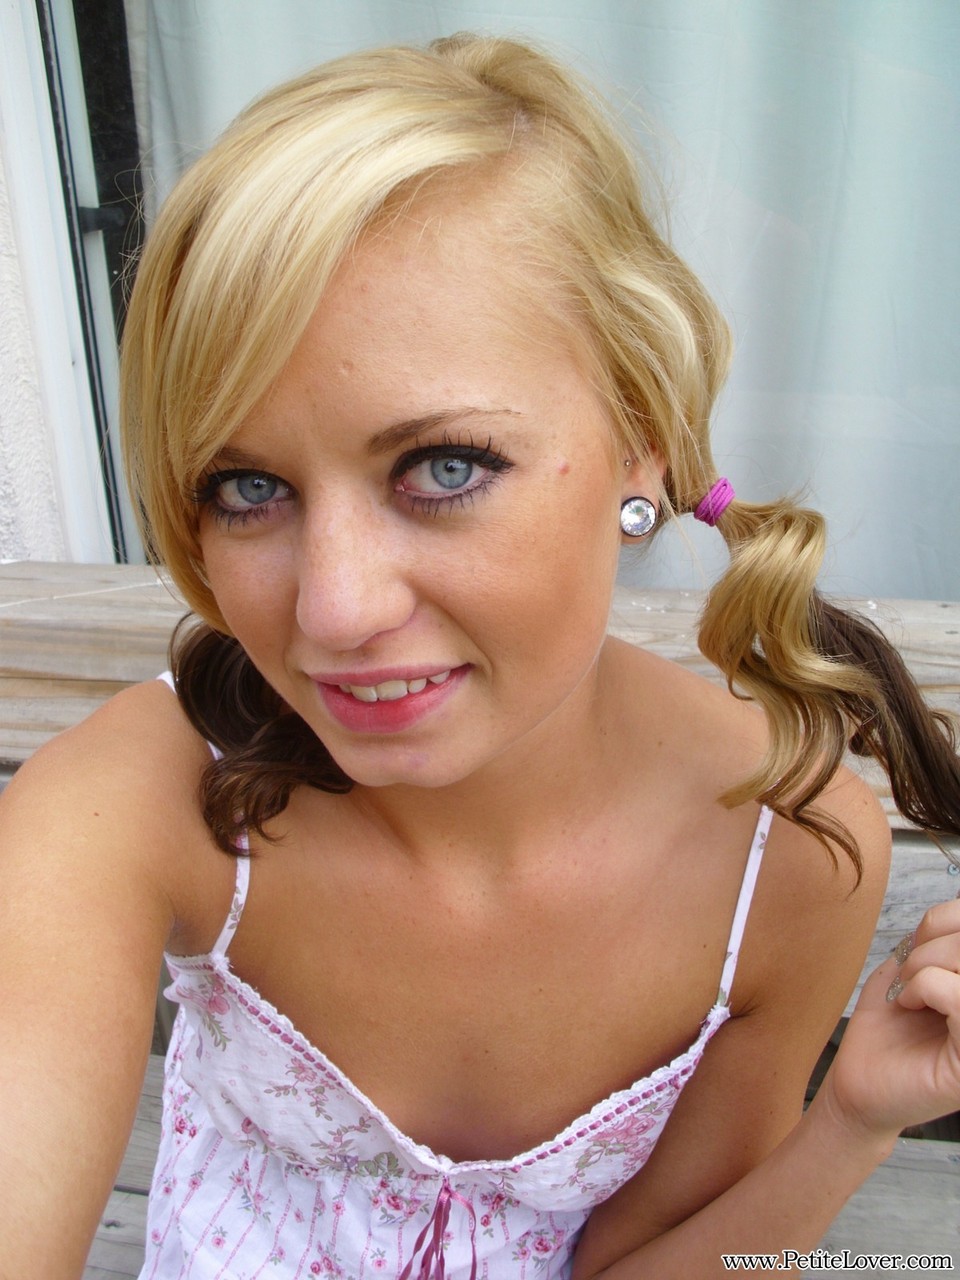 Cute blonde Tiff in pigtails showing off her wee small tits & tiny bald pussy foto porno #428478629 | Petite Lover Pics, Tiff, Amateur, porno mobile